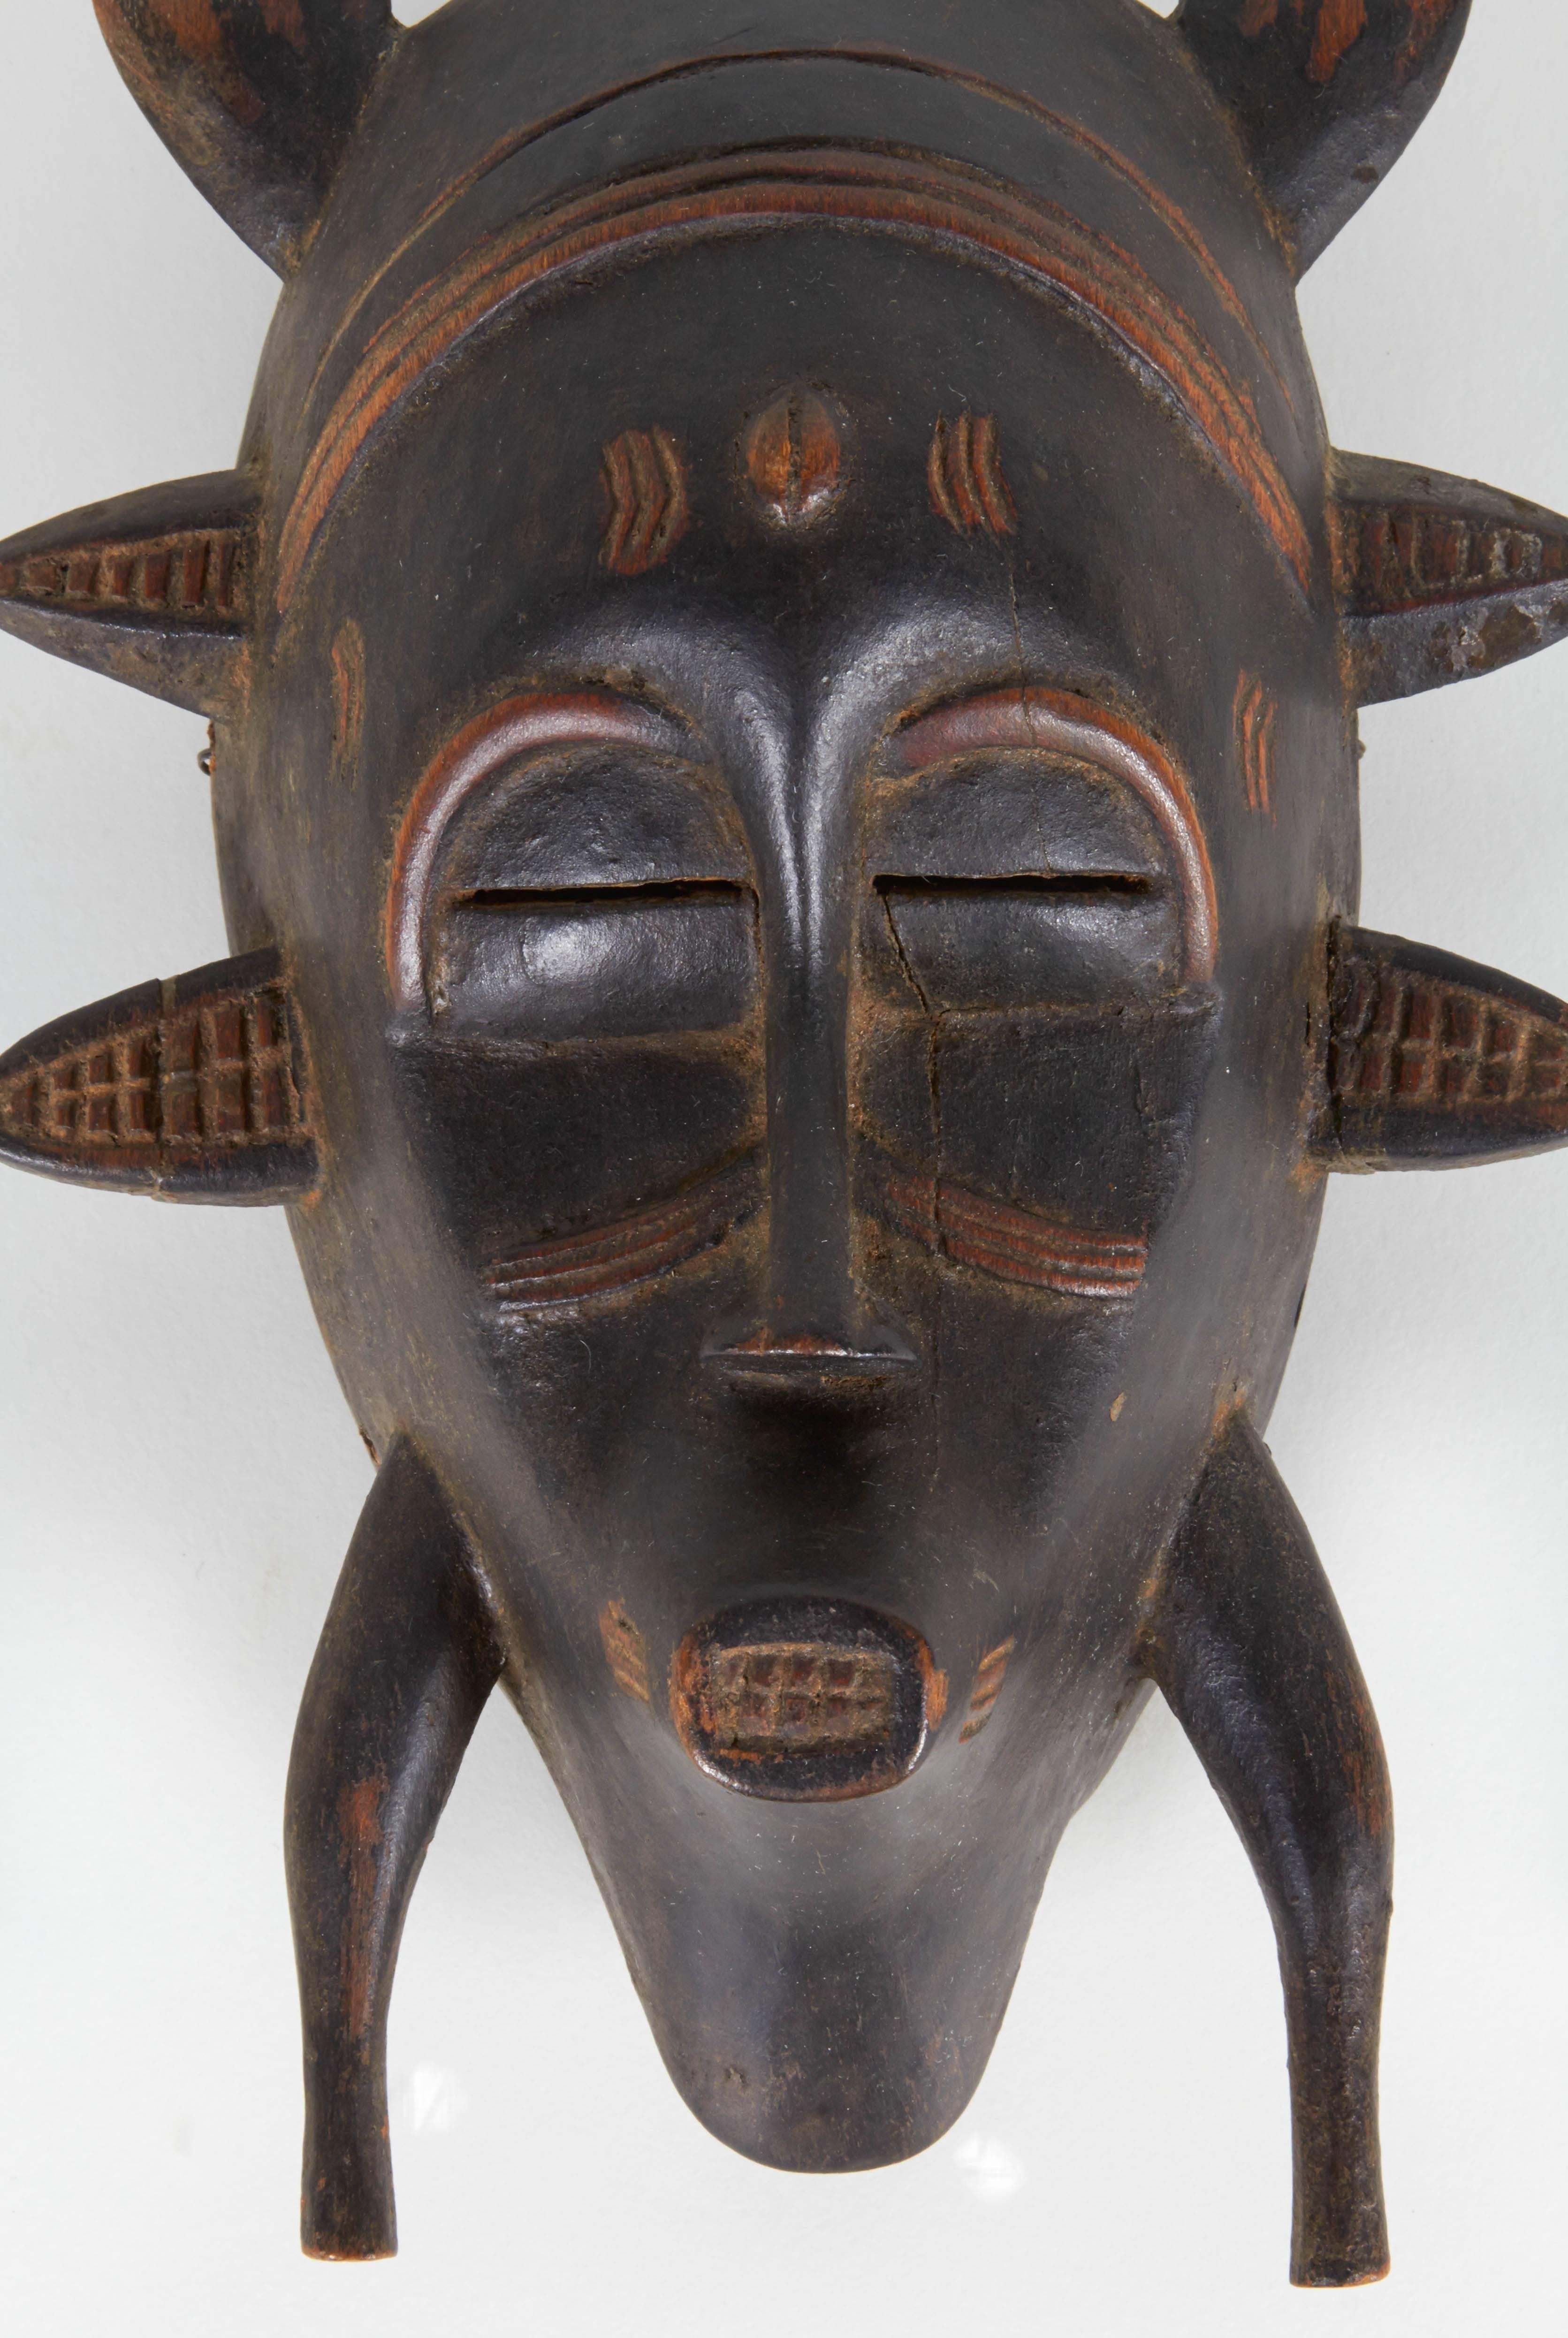 This mask was selected by Tommi Parzinger for the Sylvia Hoffman collection. The mask shows definitive signs of age, but lacks signs of traditional field use. Most likely it was carved for the early tourist trade during the first half of the 20th